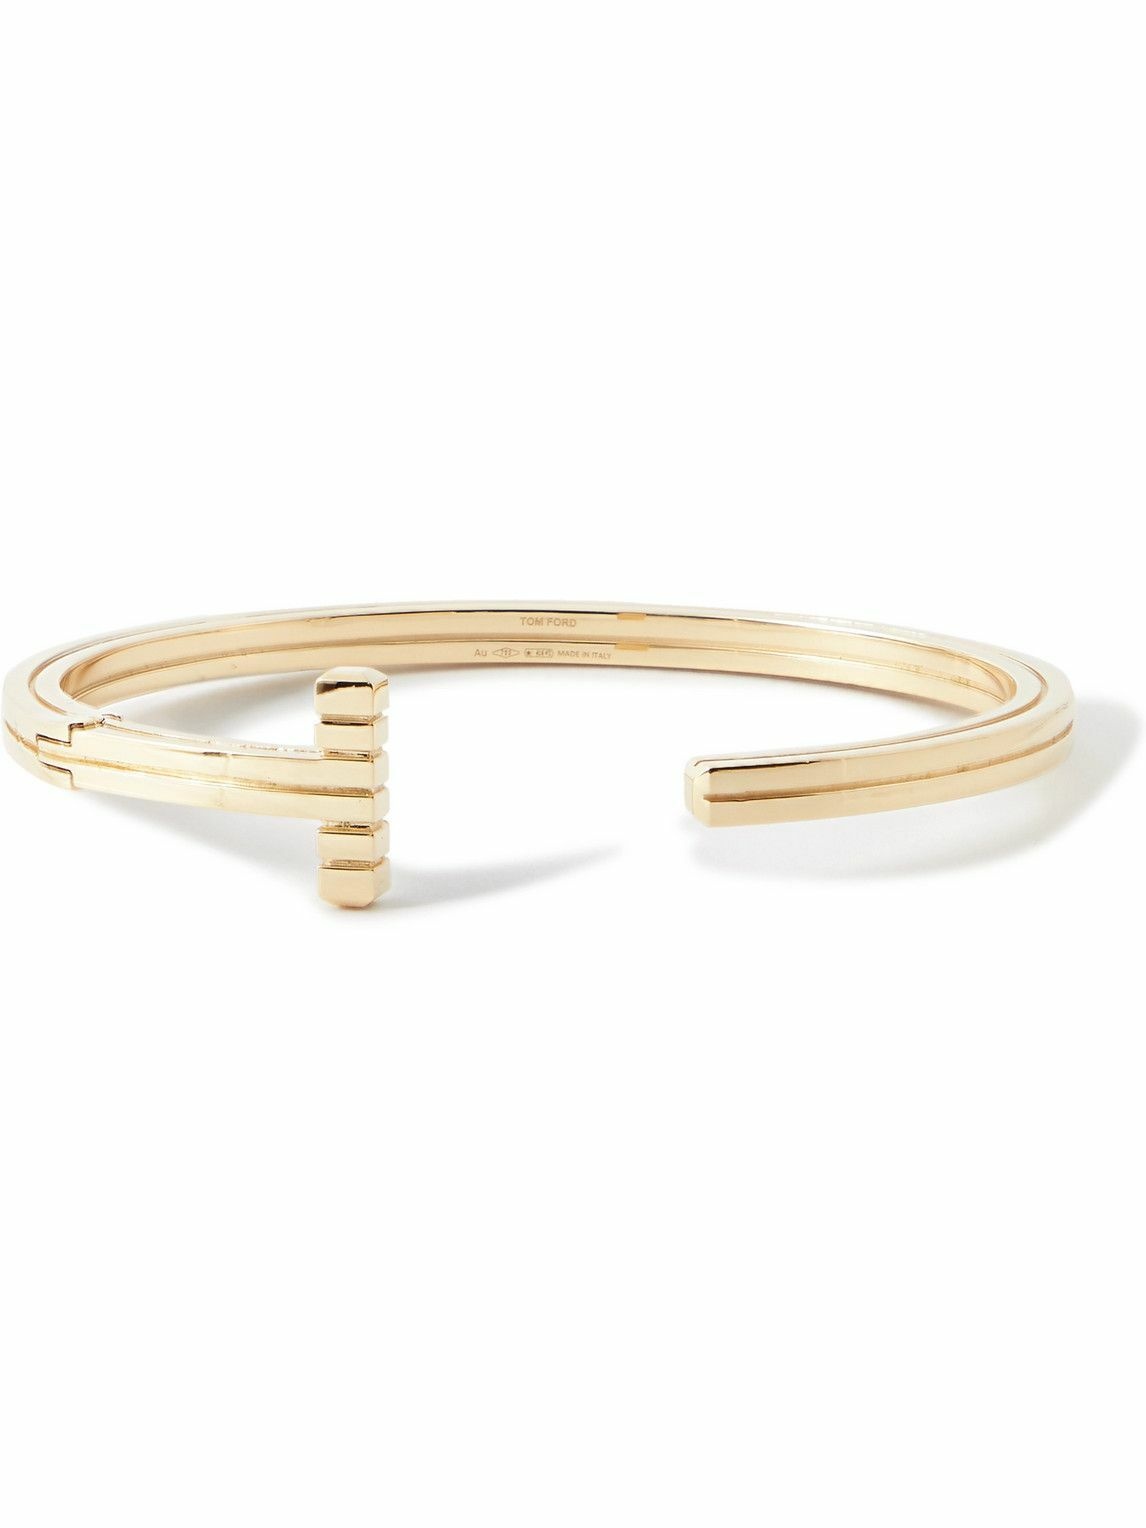 TOM FORD - Gold Cuff - Gold TOM FORD